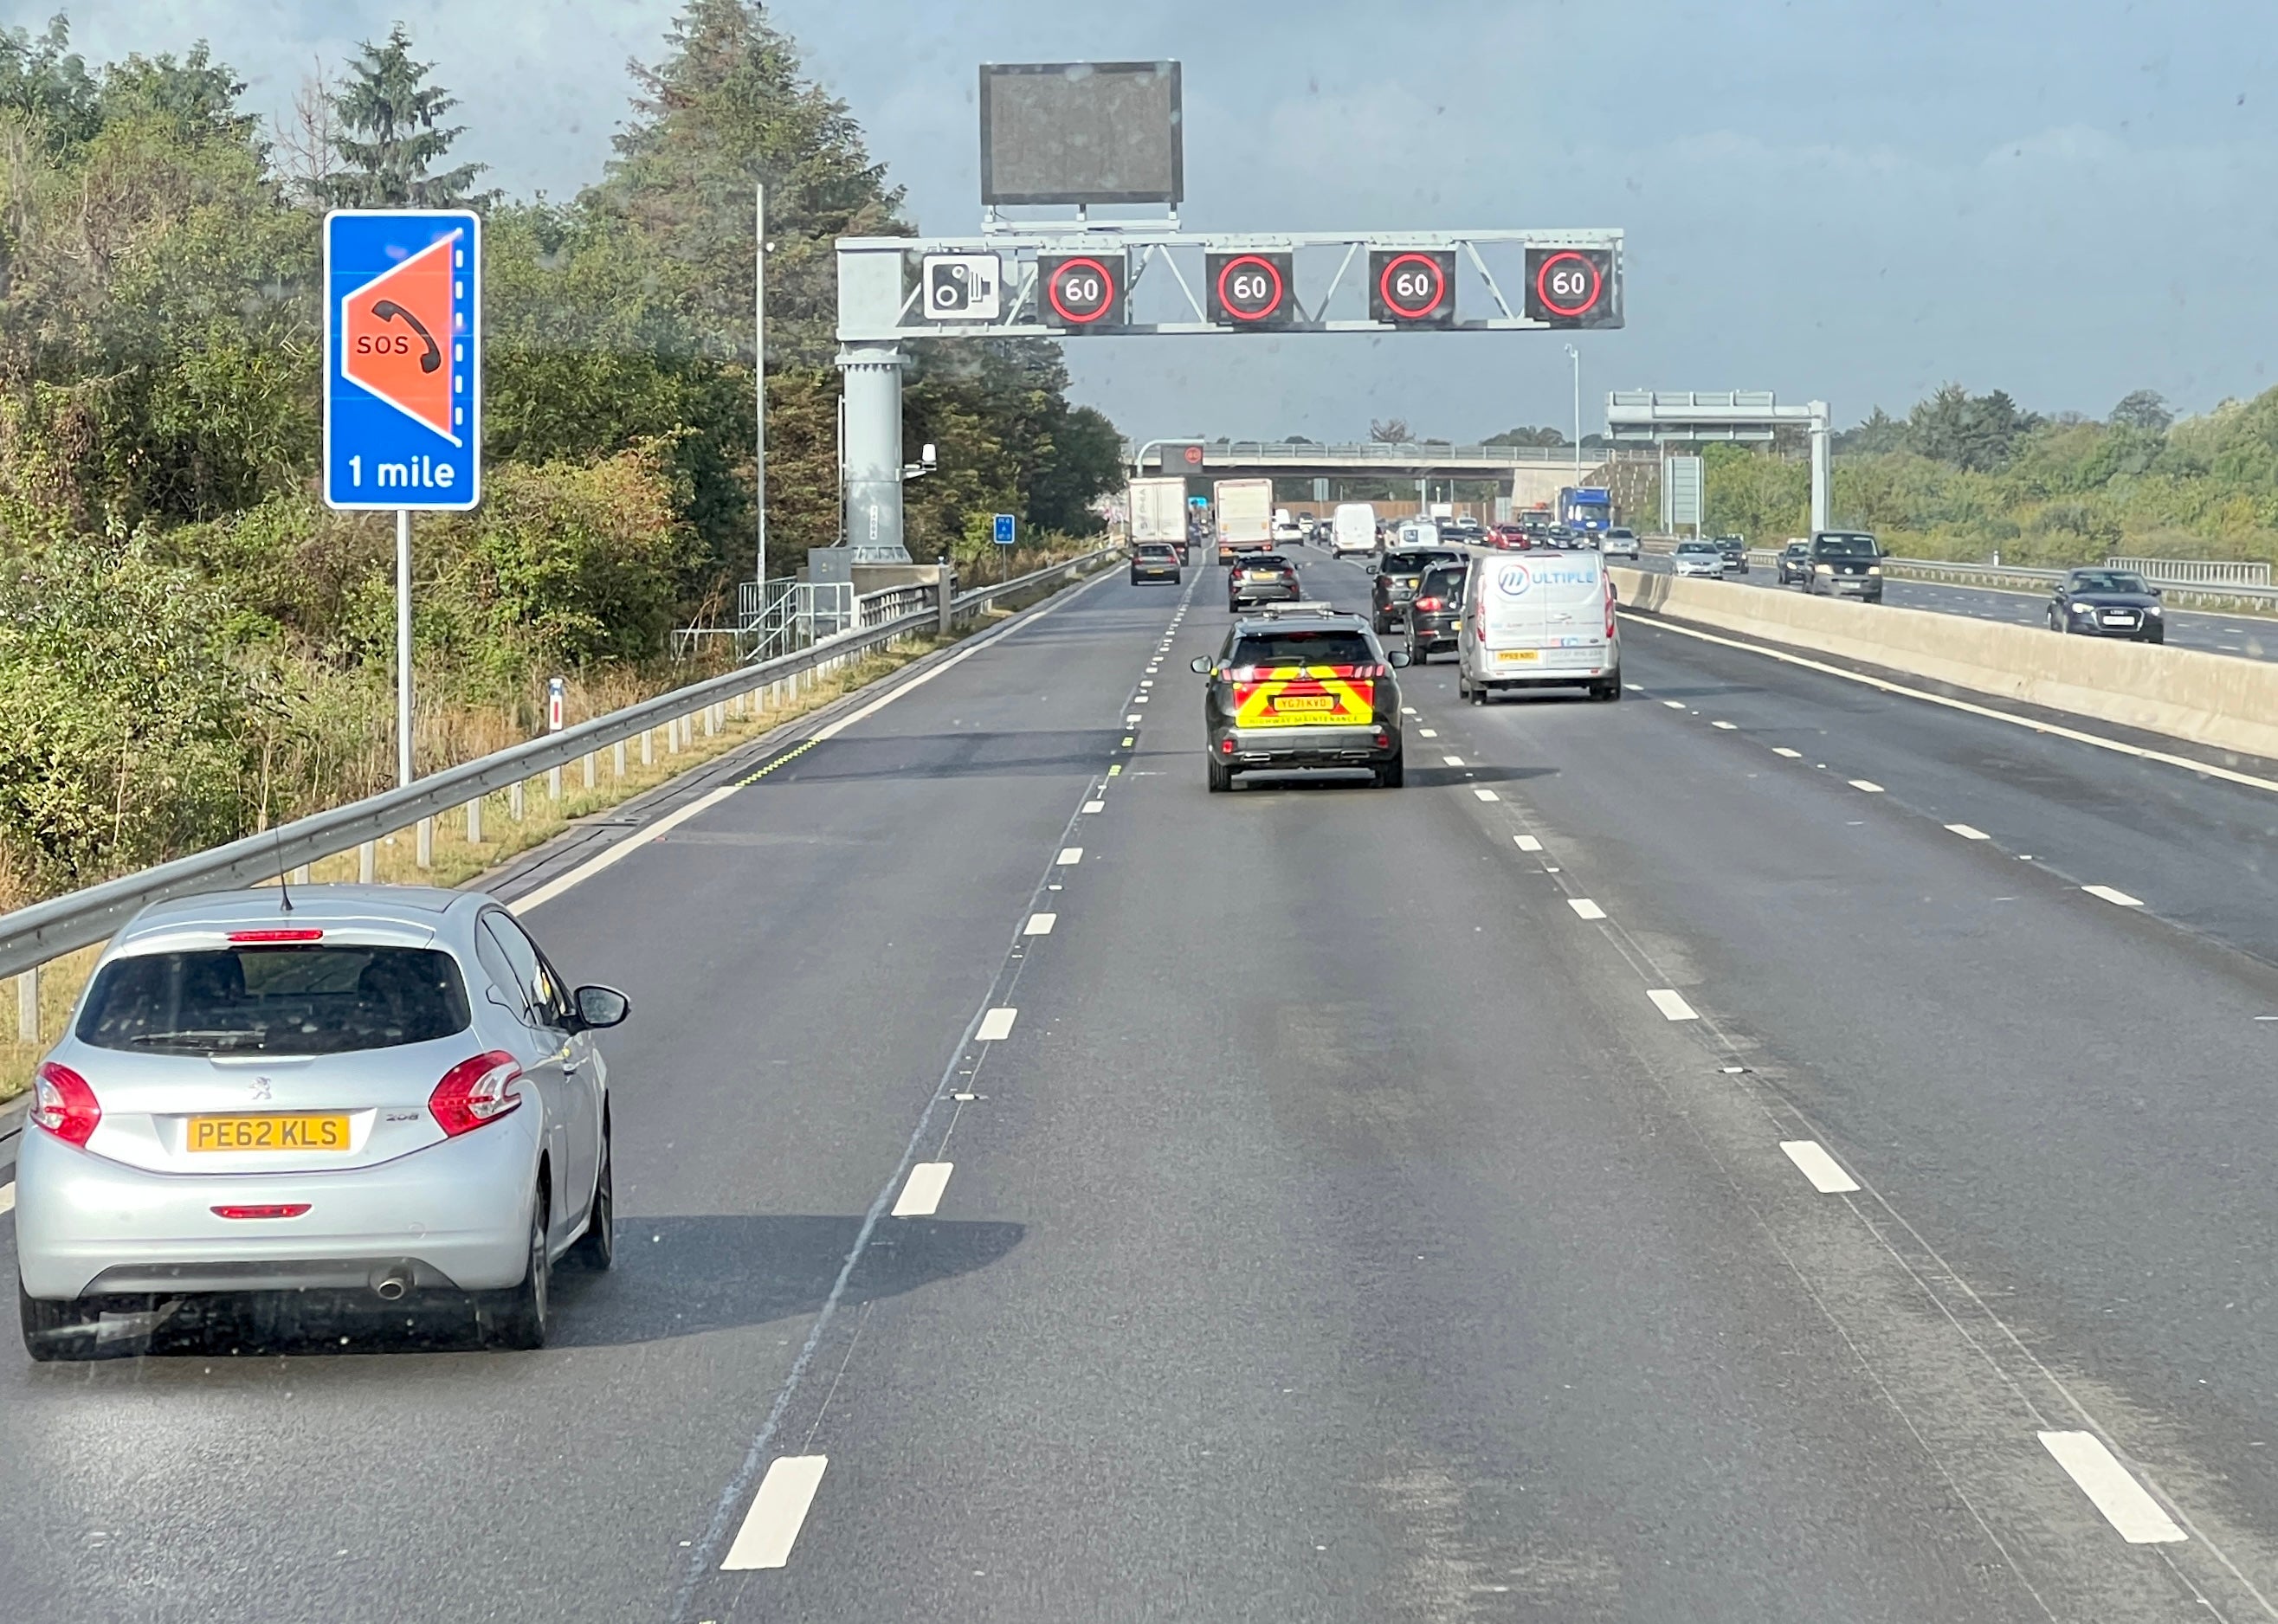 All-lane running: a ‘smart’ section of the M4 motorway west from London, showing a sign for an emergency refuge and gantry with speed restrictions